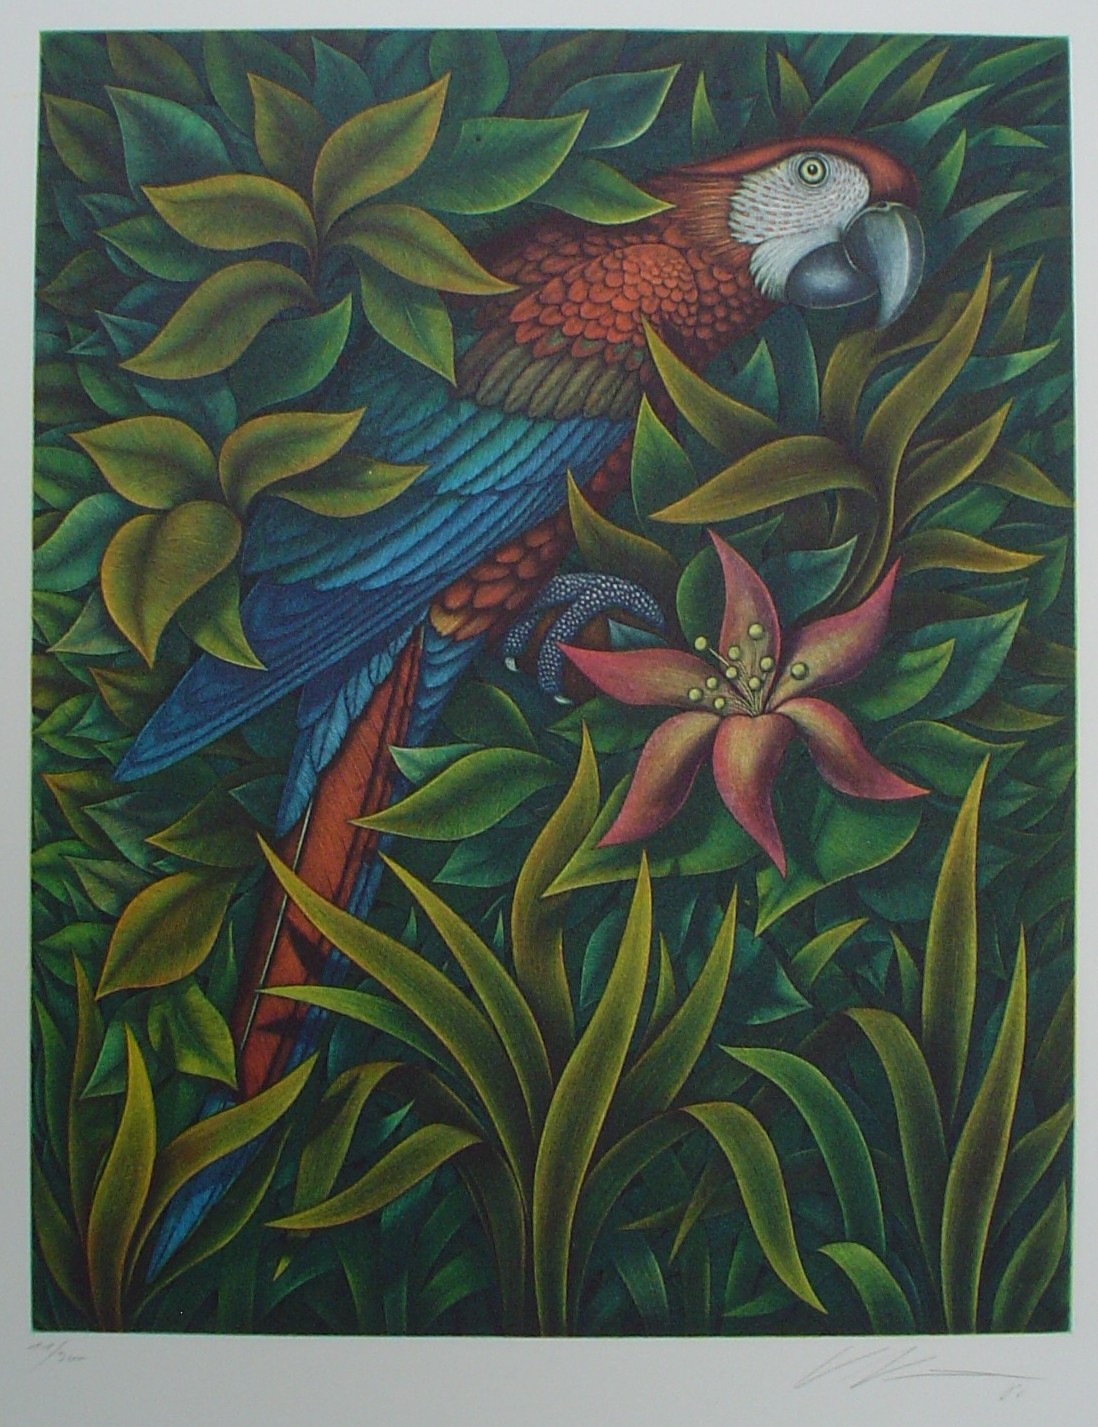 Macaw by Volker Kühn (ie. Volker Kuehn) - original hand-coloured etching - numbered 11/300, signed and dated '86 in pencil by artist